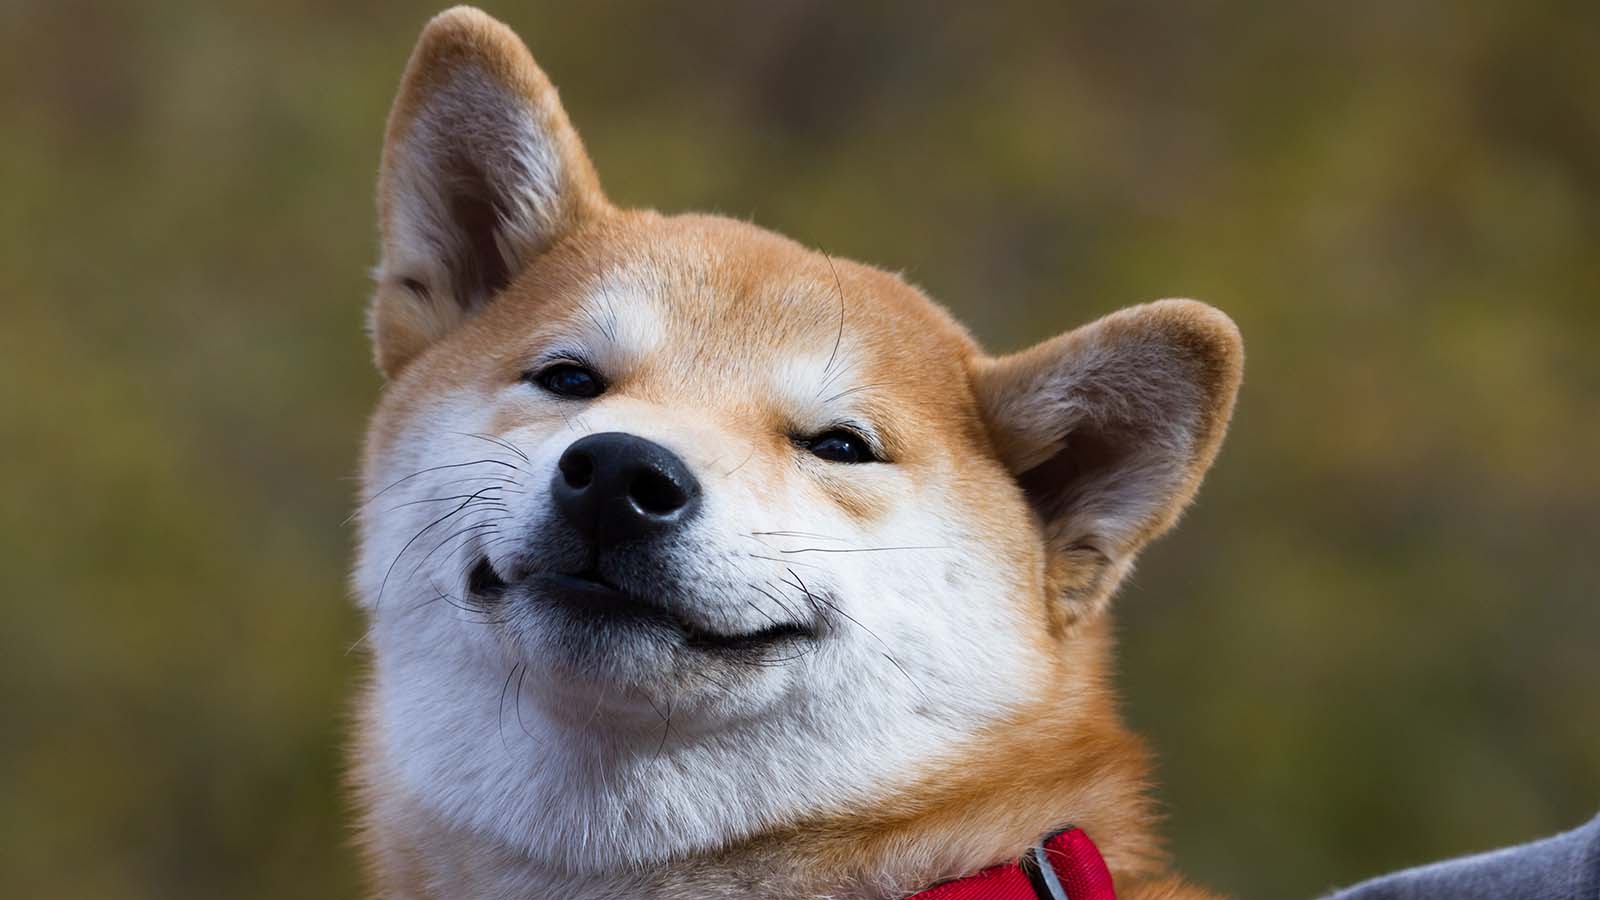 A close-up shot of a Shiba Inu with a grinning face.